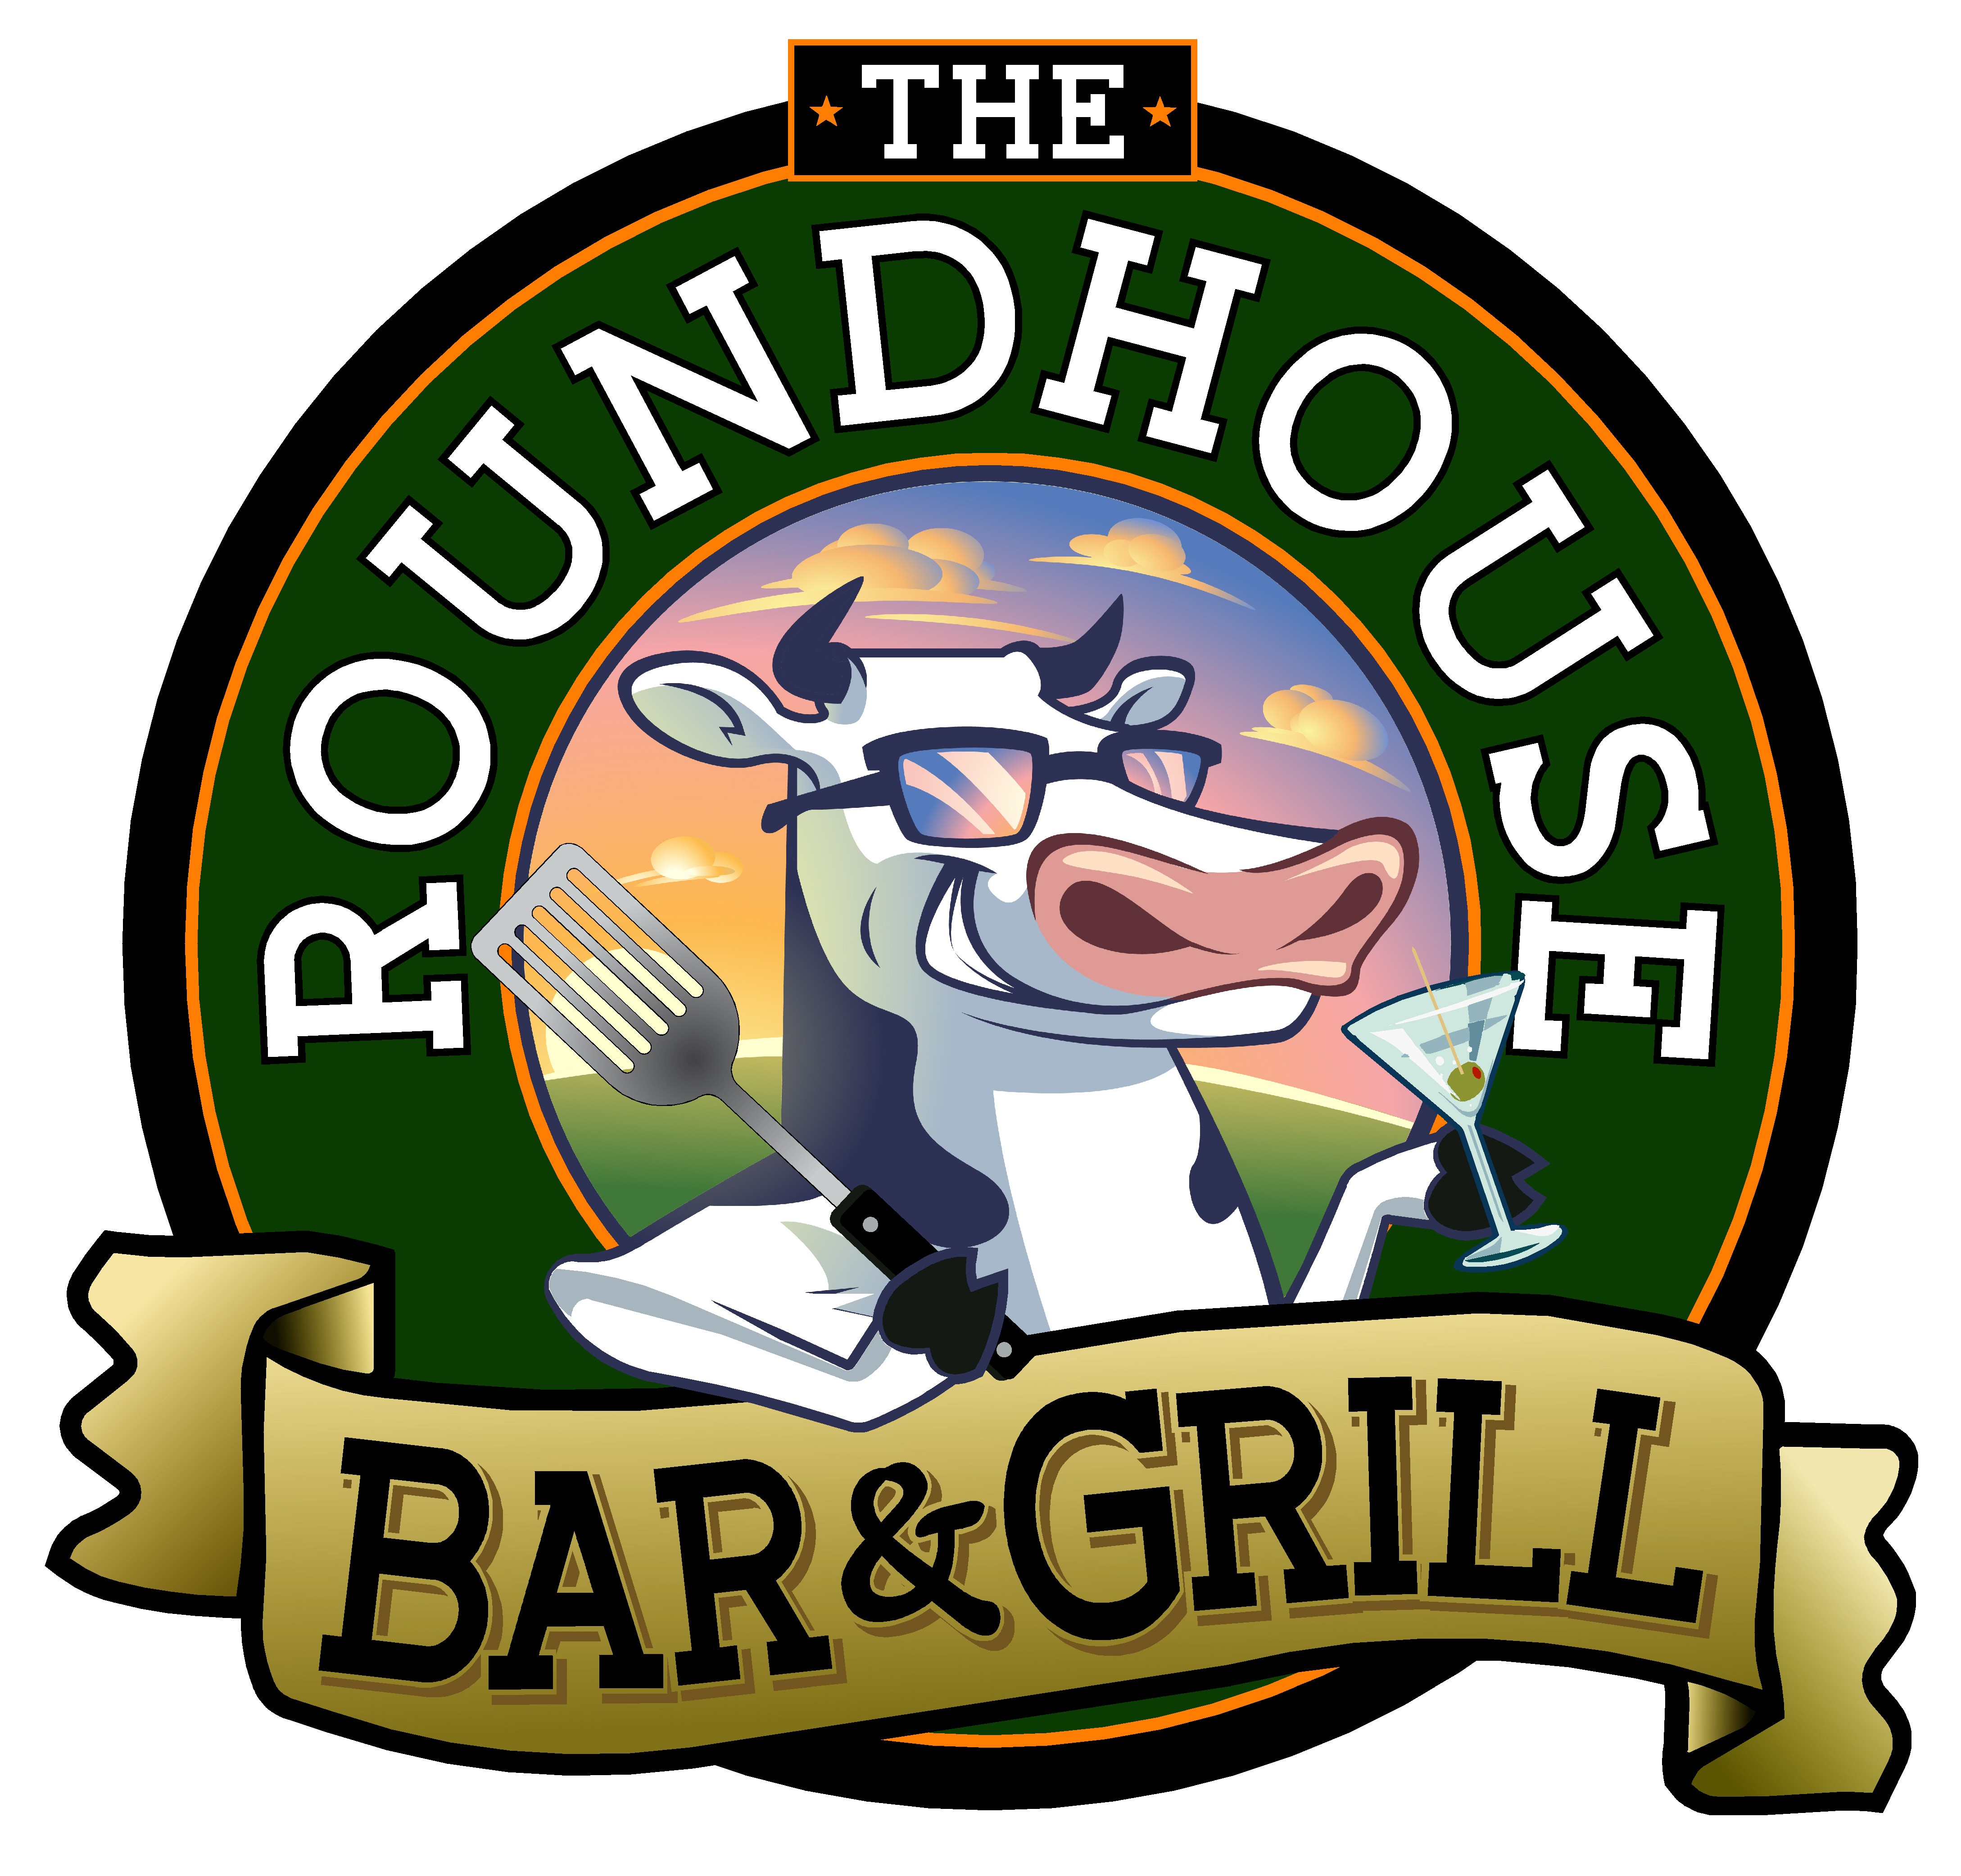 The Roundhouse Bar & Grill, LLC 2282 Depot Street